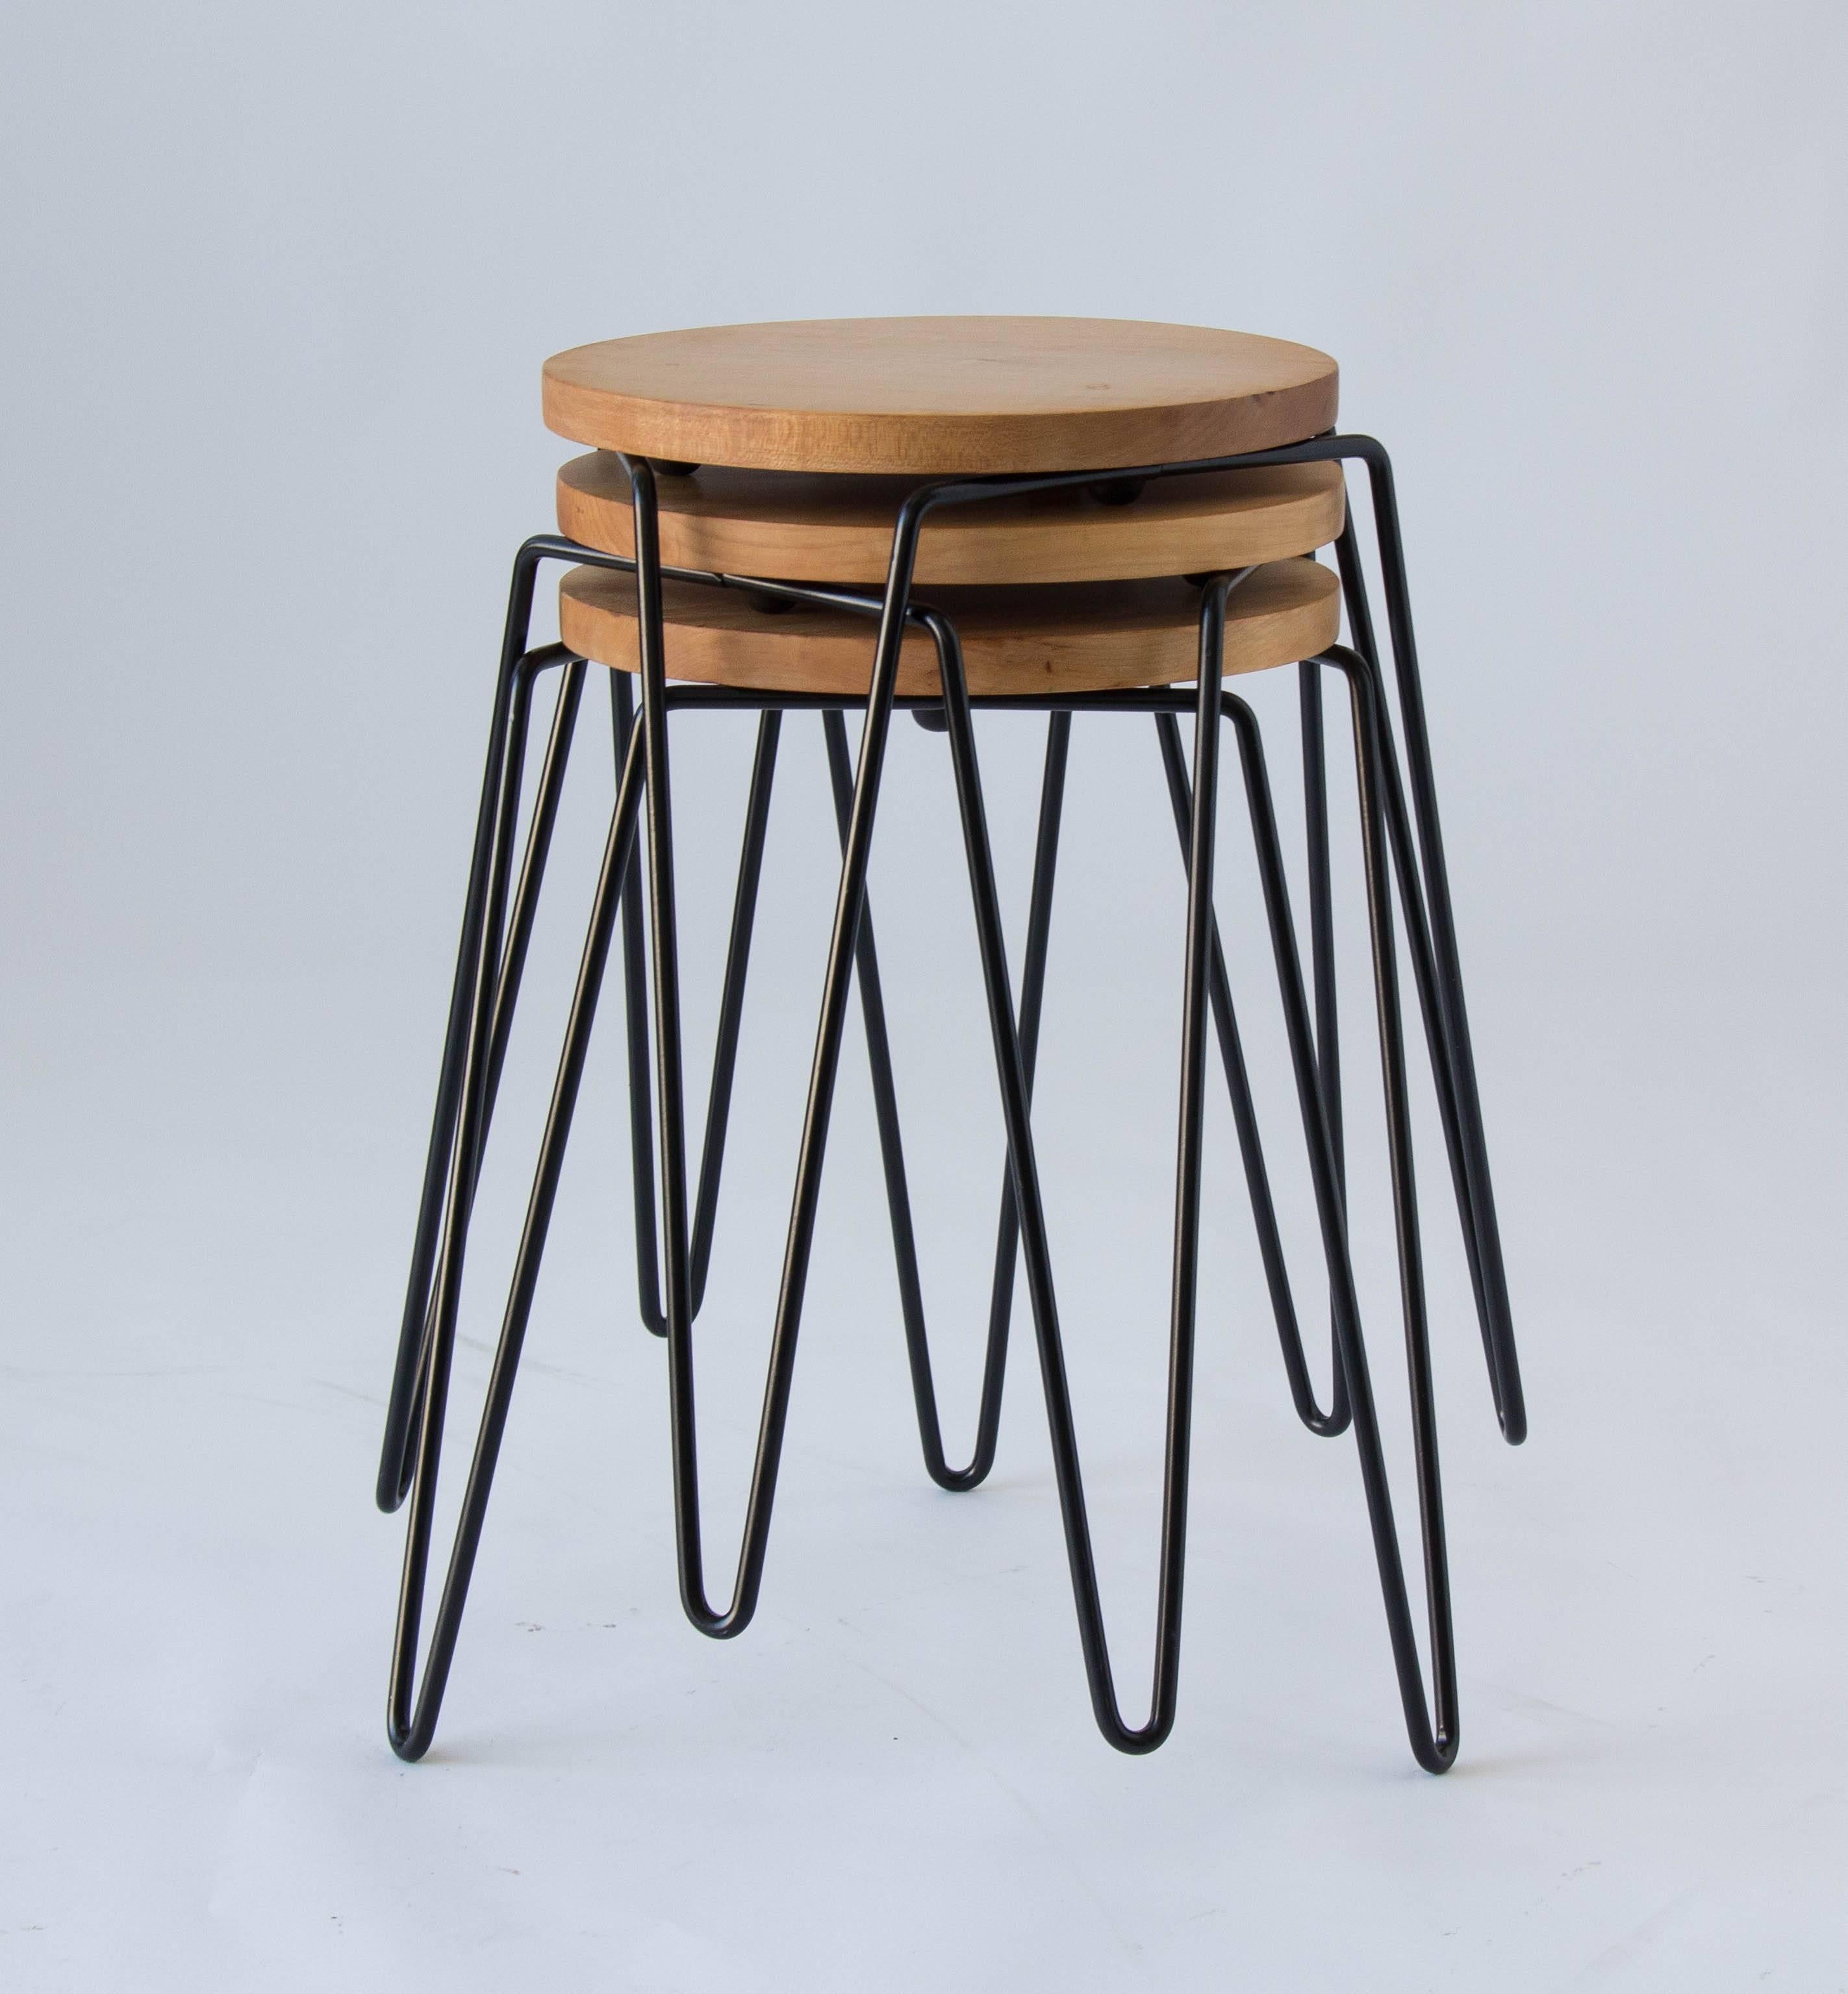 American Three Knoll No. 75 Stools with Wrought Iron Legs